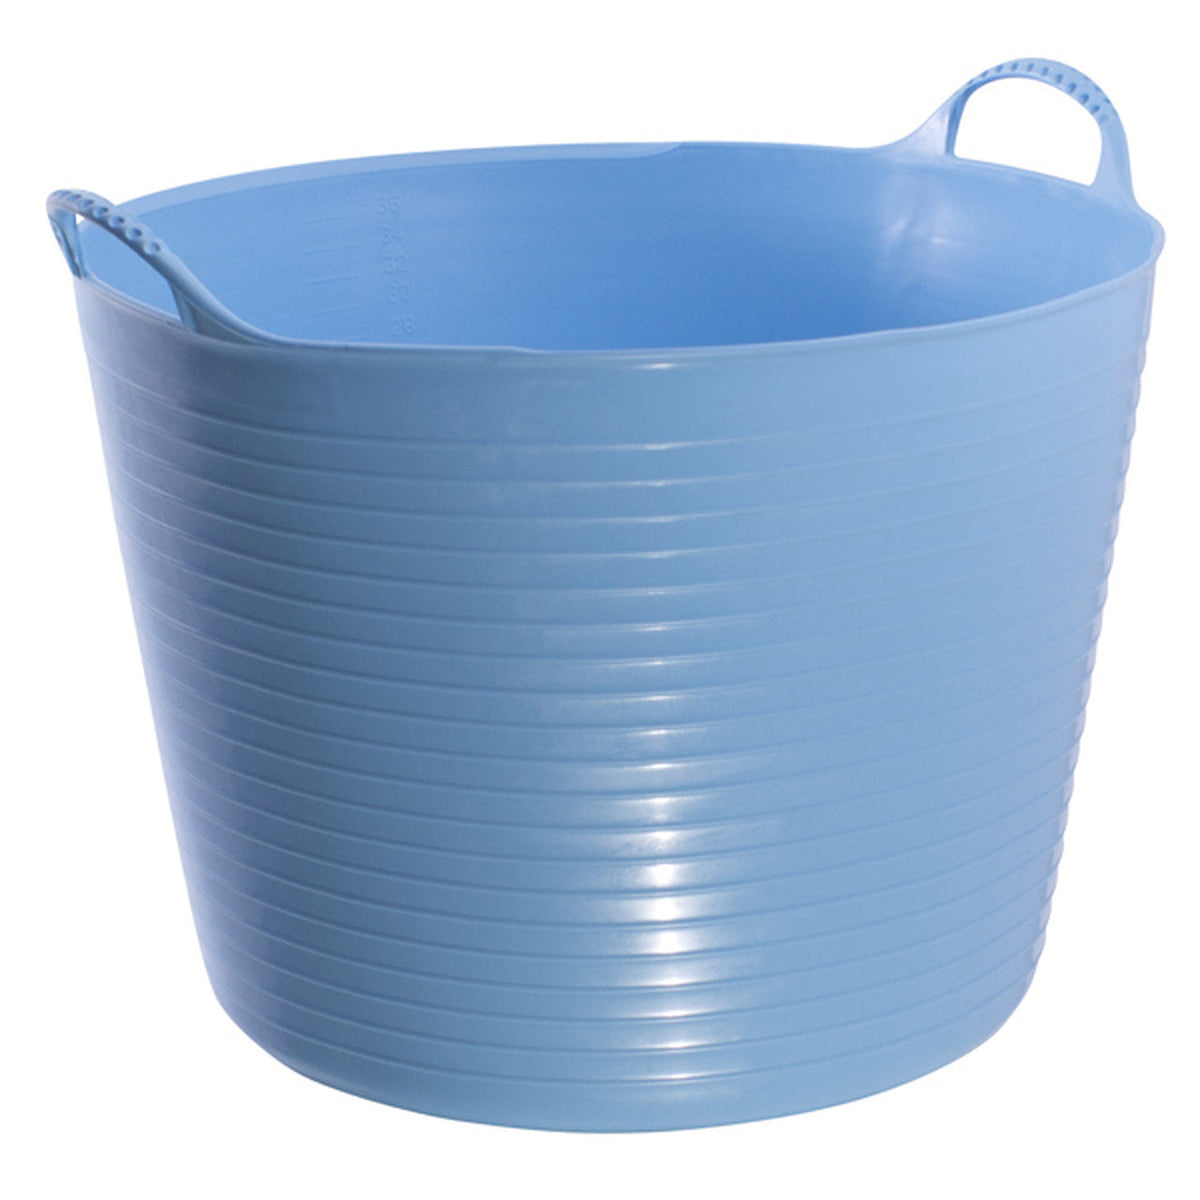 Large light blue bucket with measurements on inside and two curved handles.